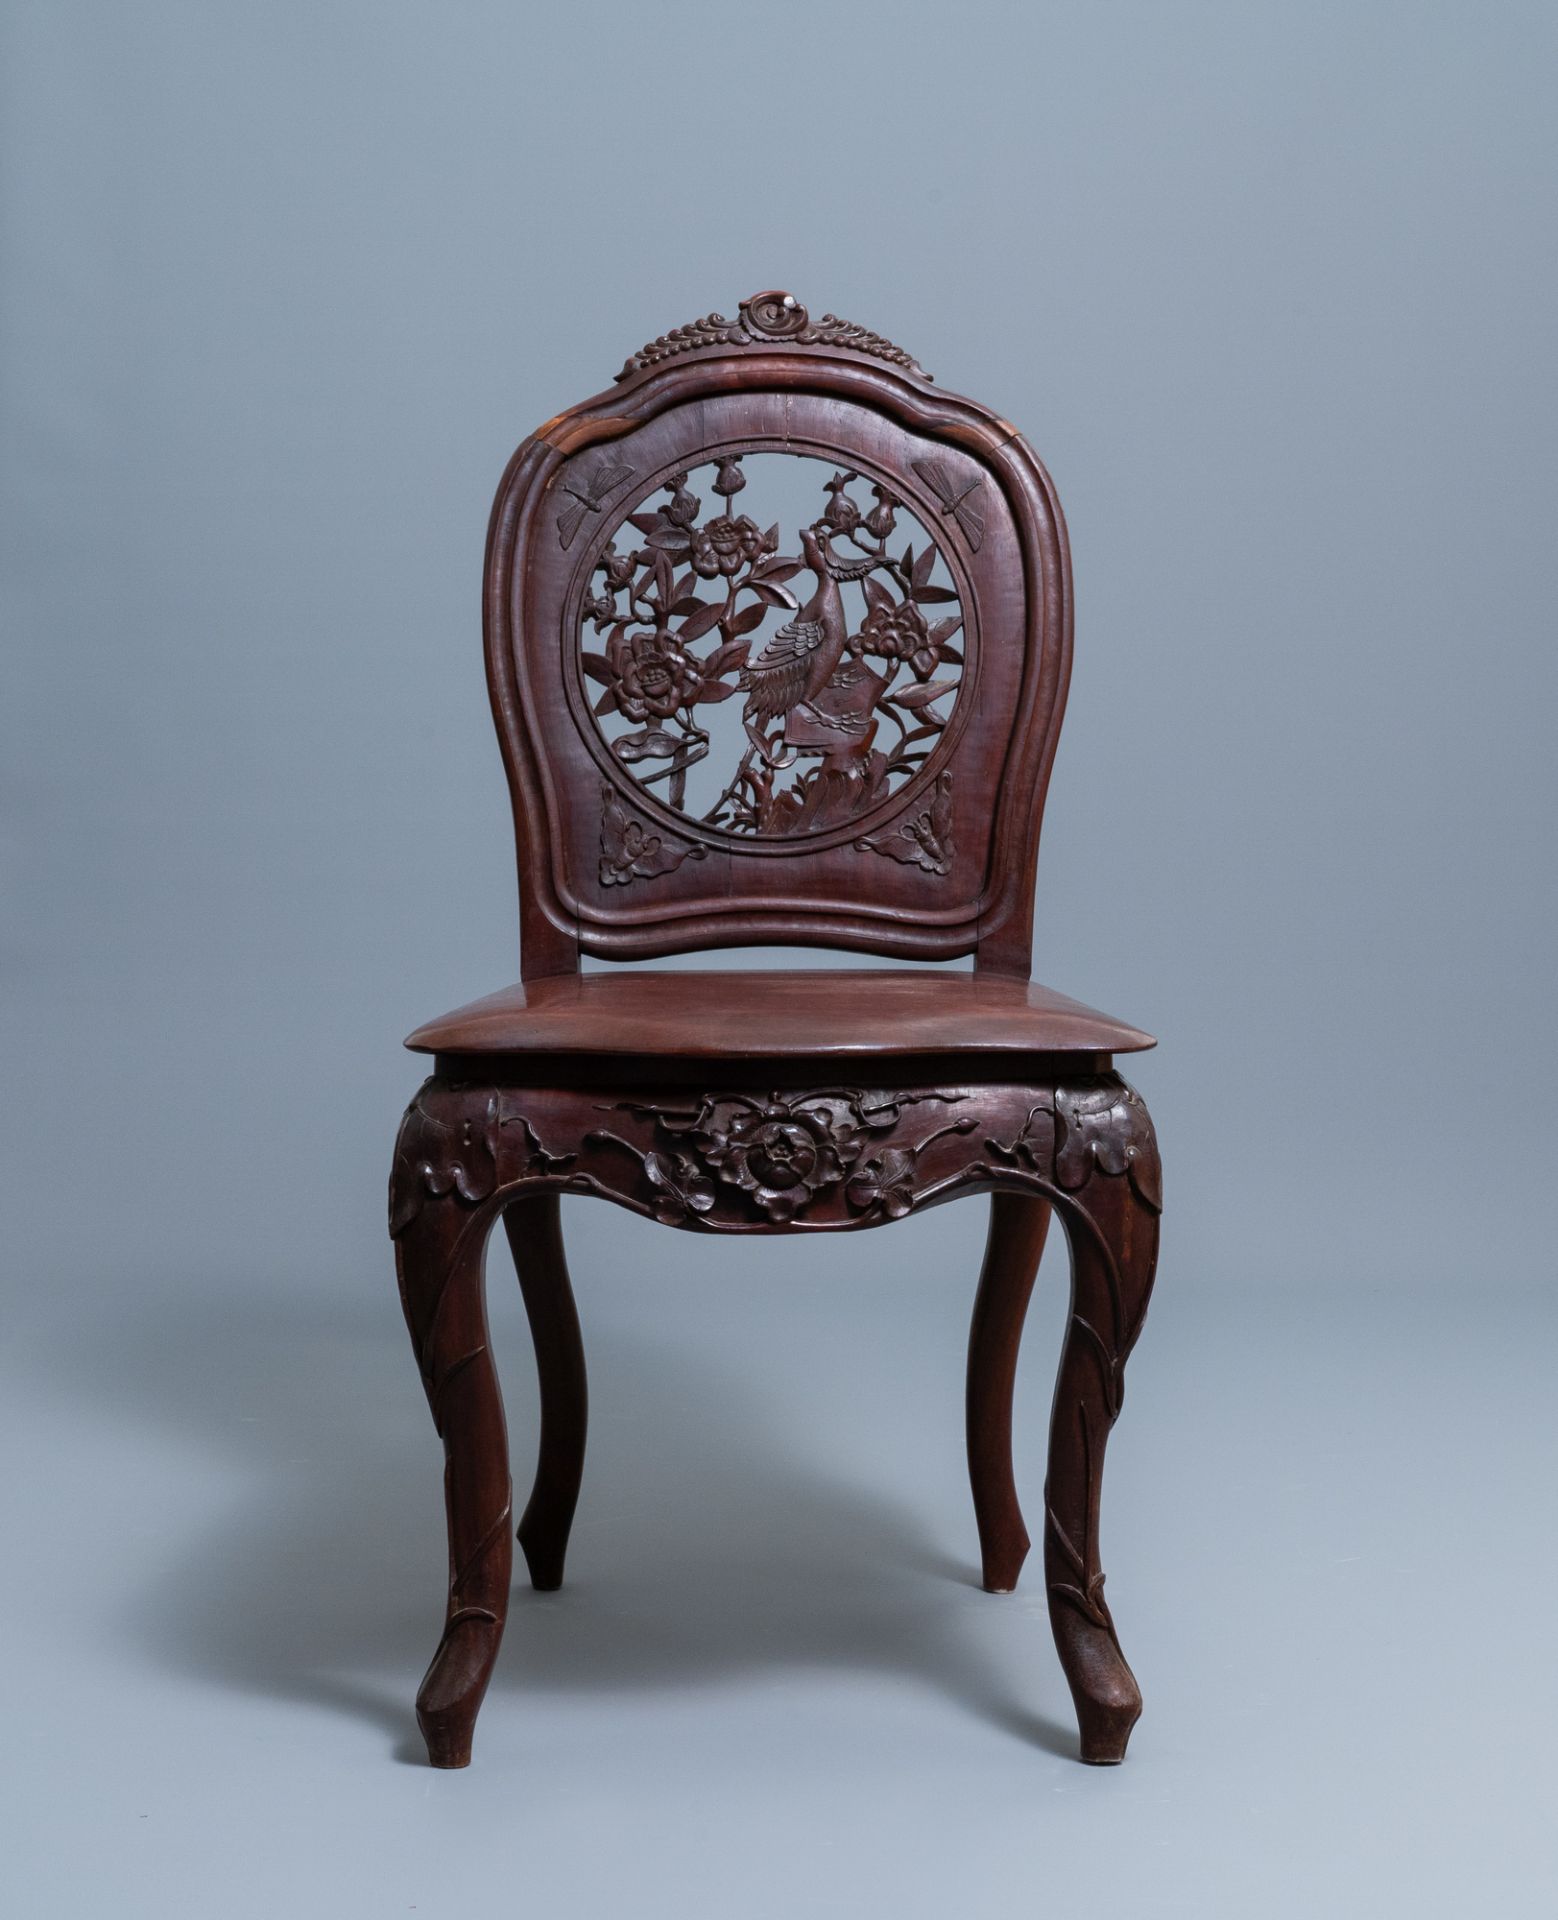 Four wooden chairs with reticulated backs, Macao or Portuguese colonial, 19th C. - Image 12 of 47